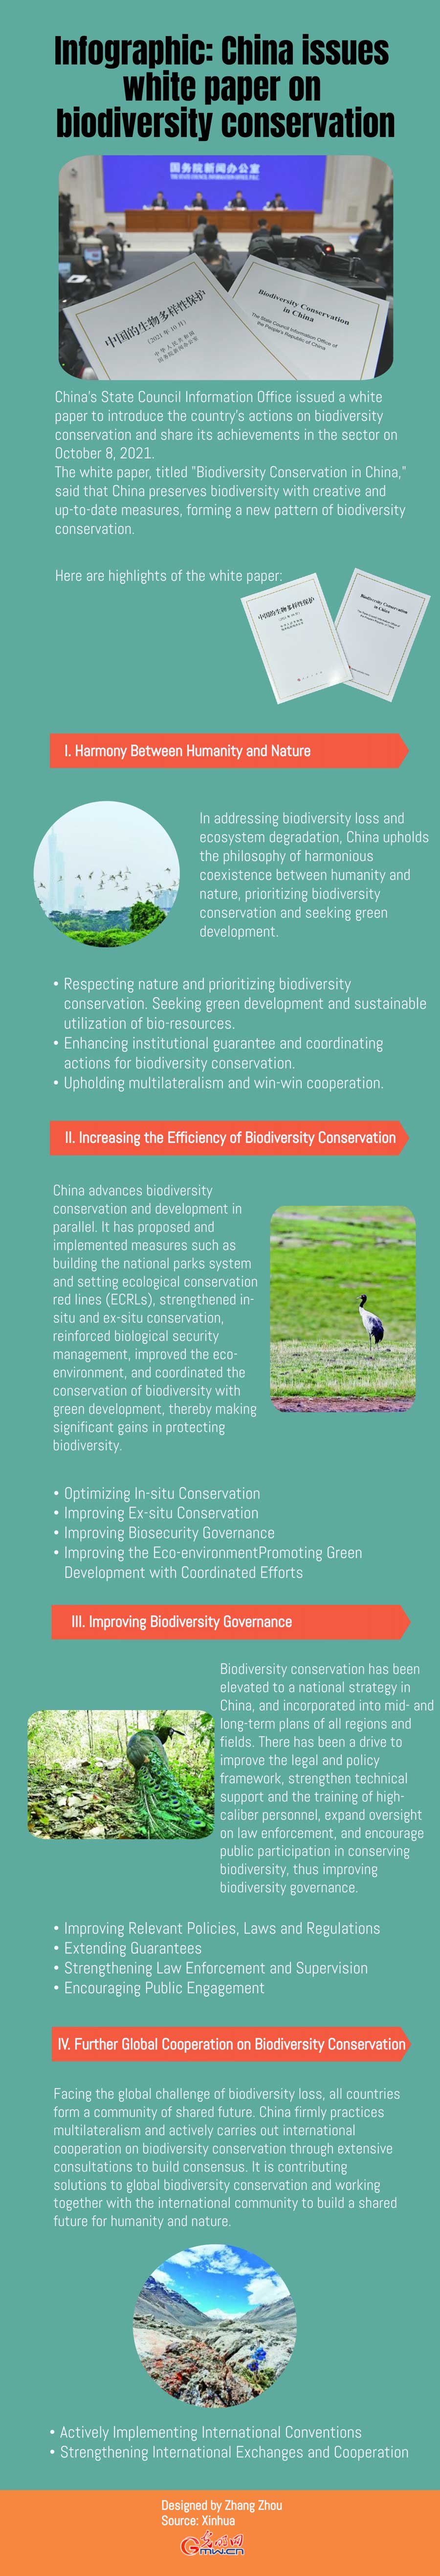 Infographic: China issues white paper on biodiversity conservation